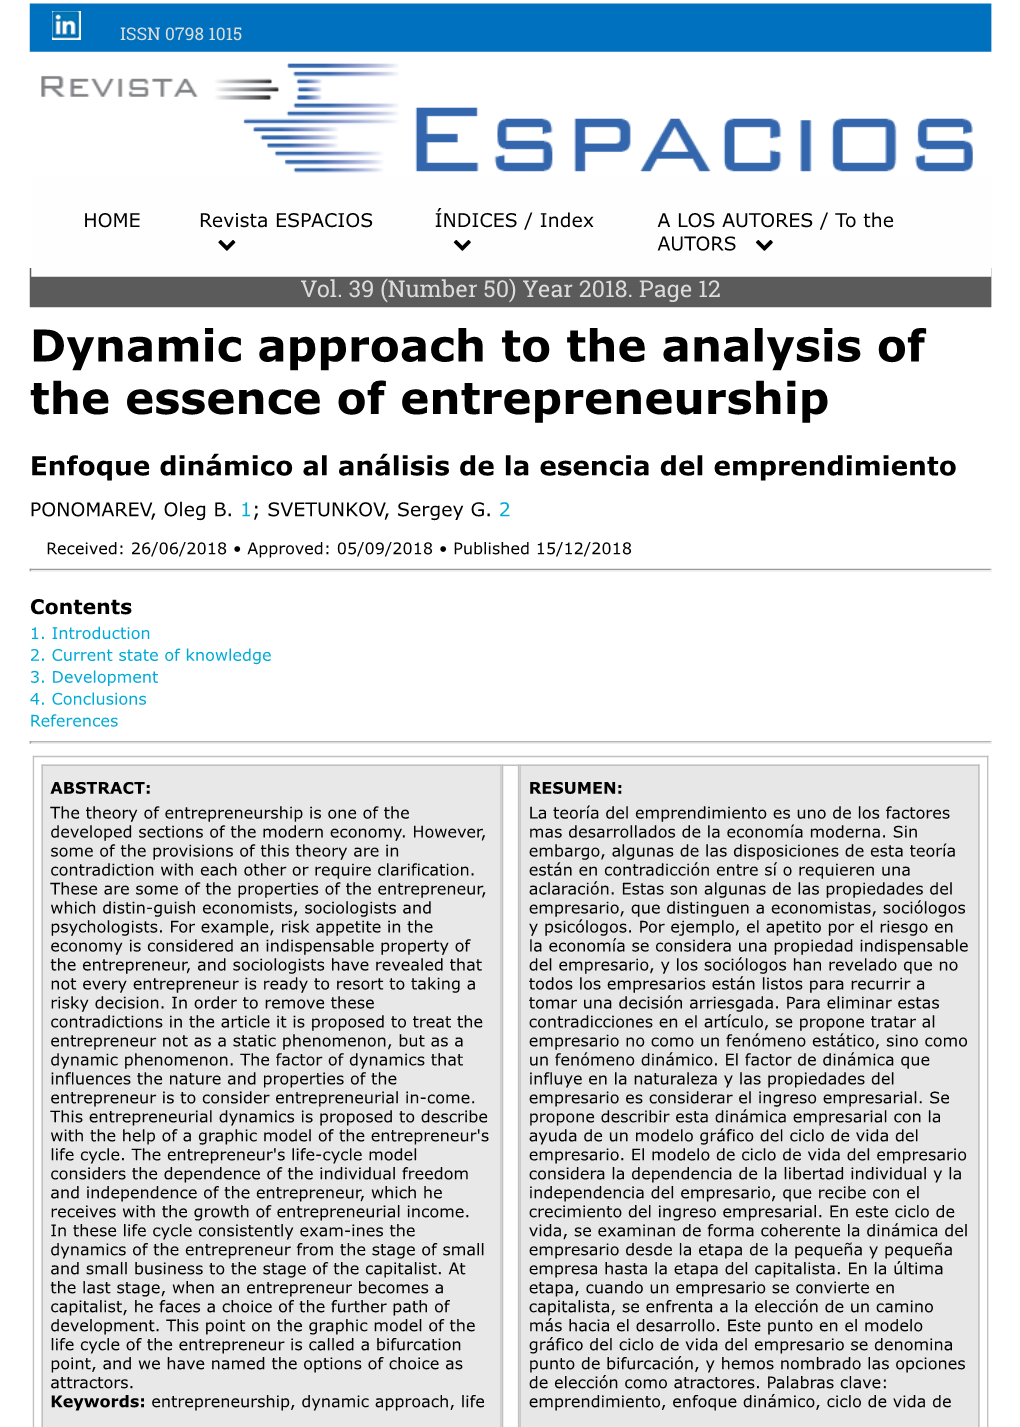 Dynamic Approach to the Analysis of the Essence of Entrepreneurship